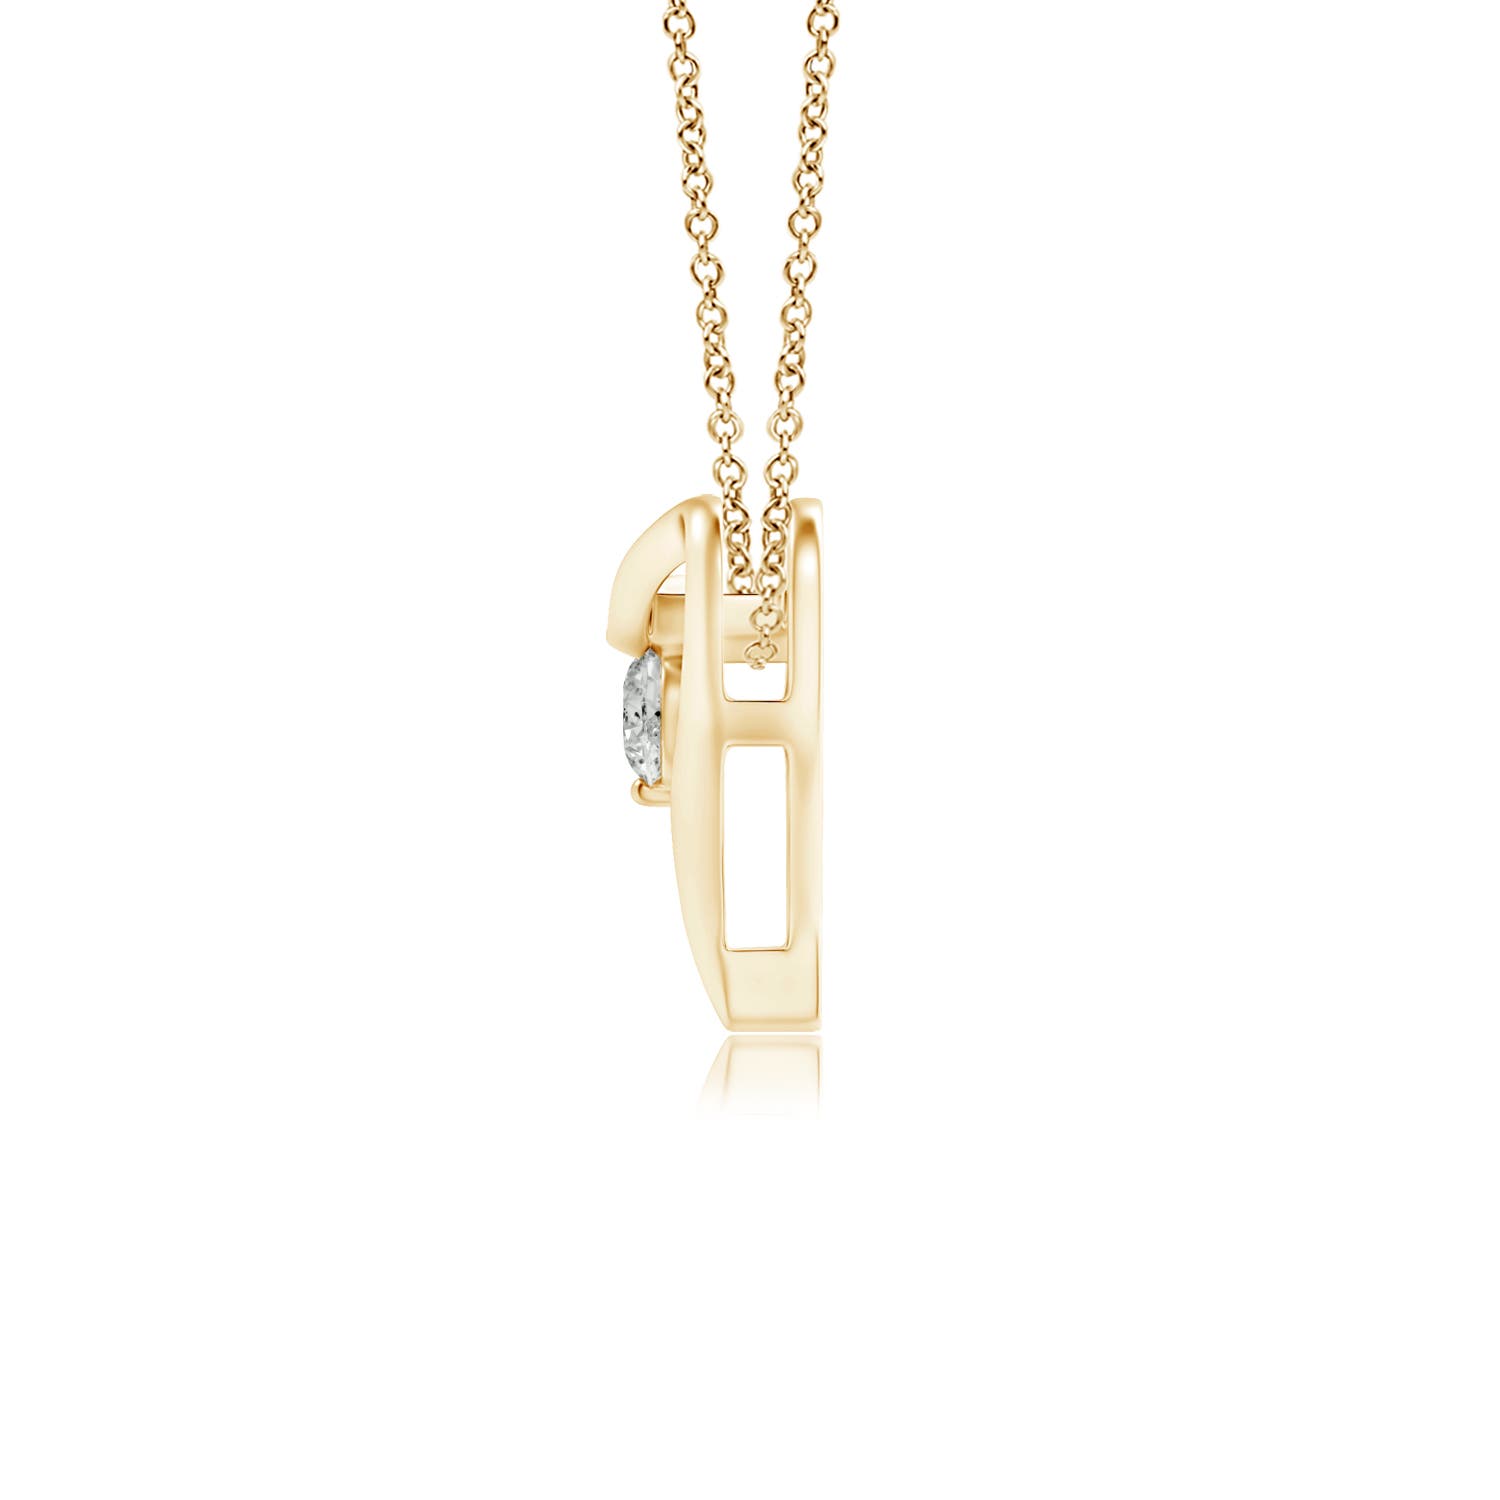 K, I3 / 0.11 CT / 14 KT Yellow Gold